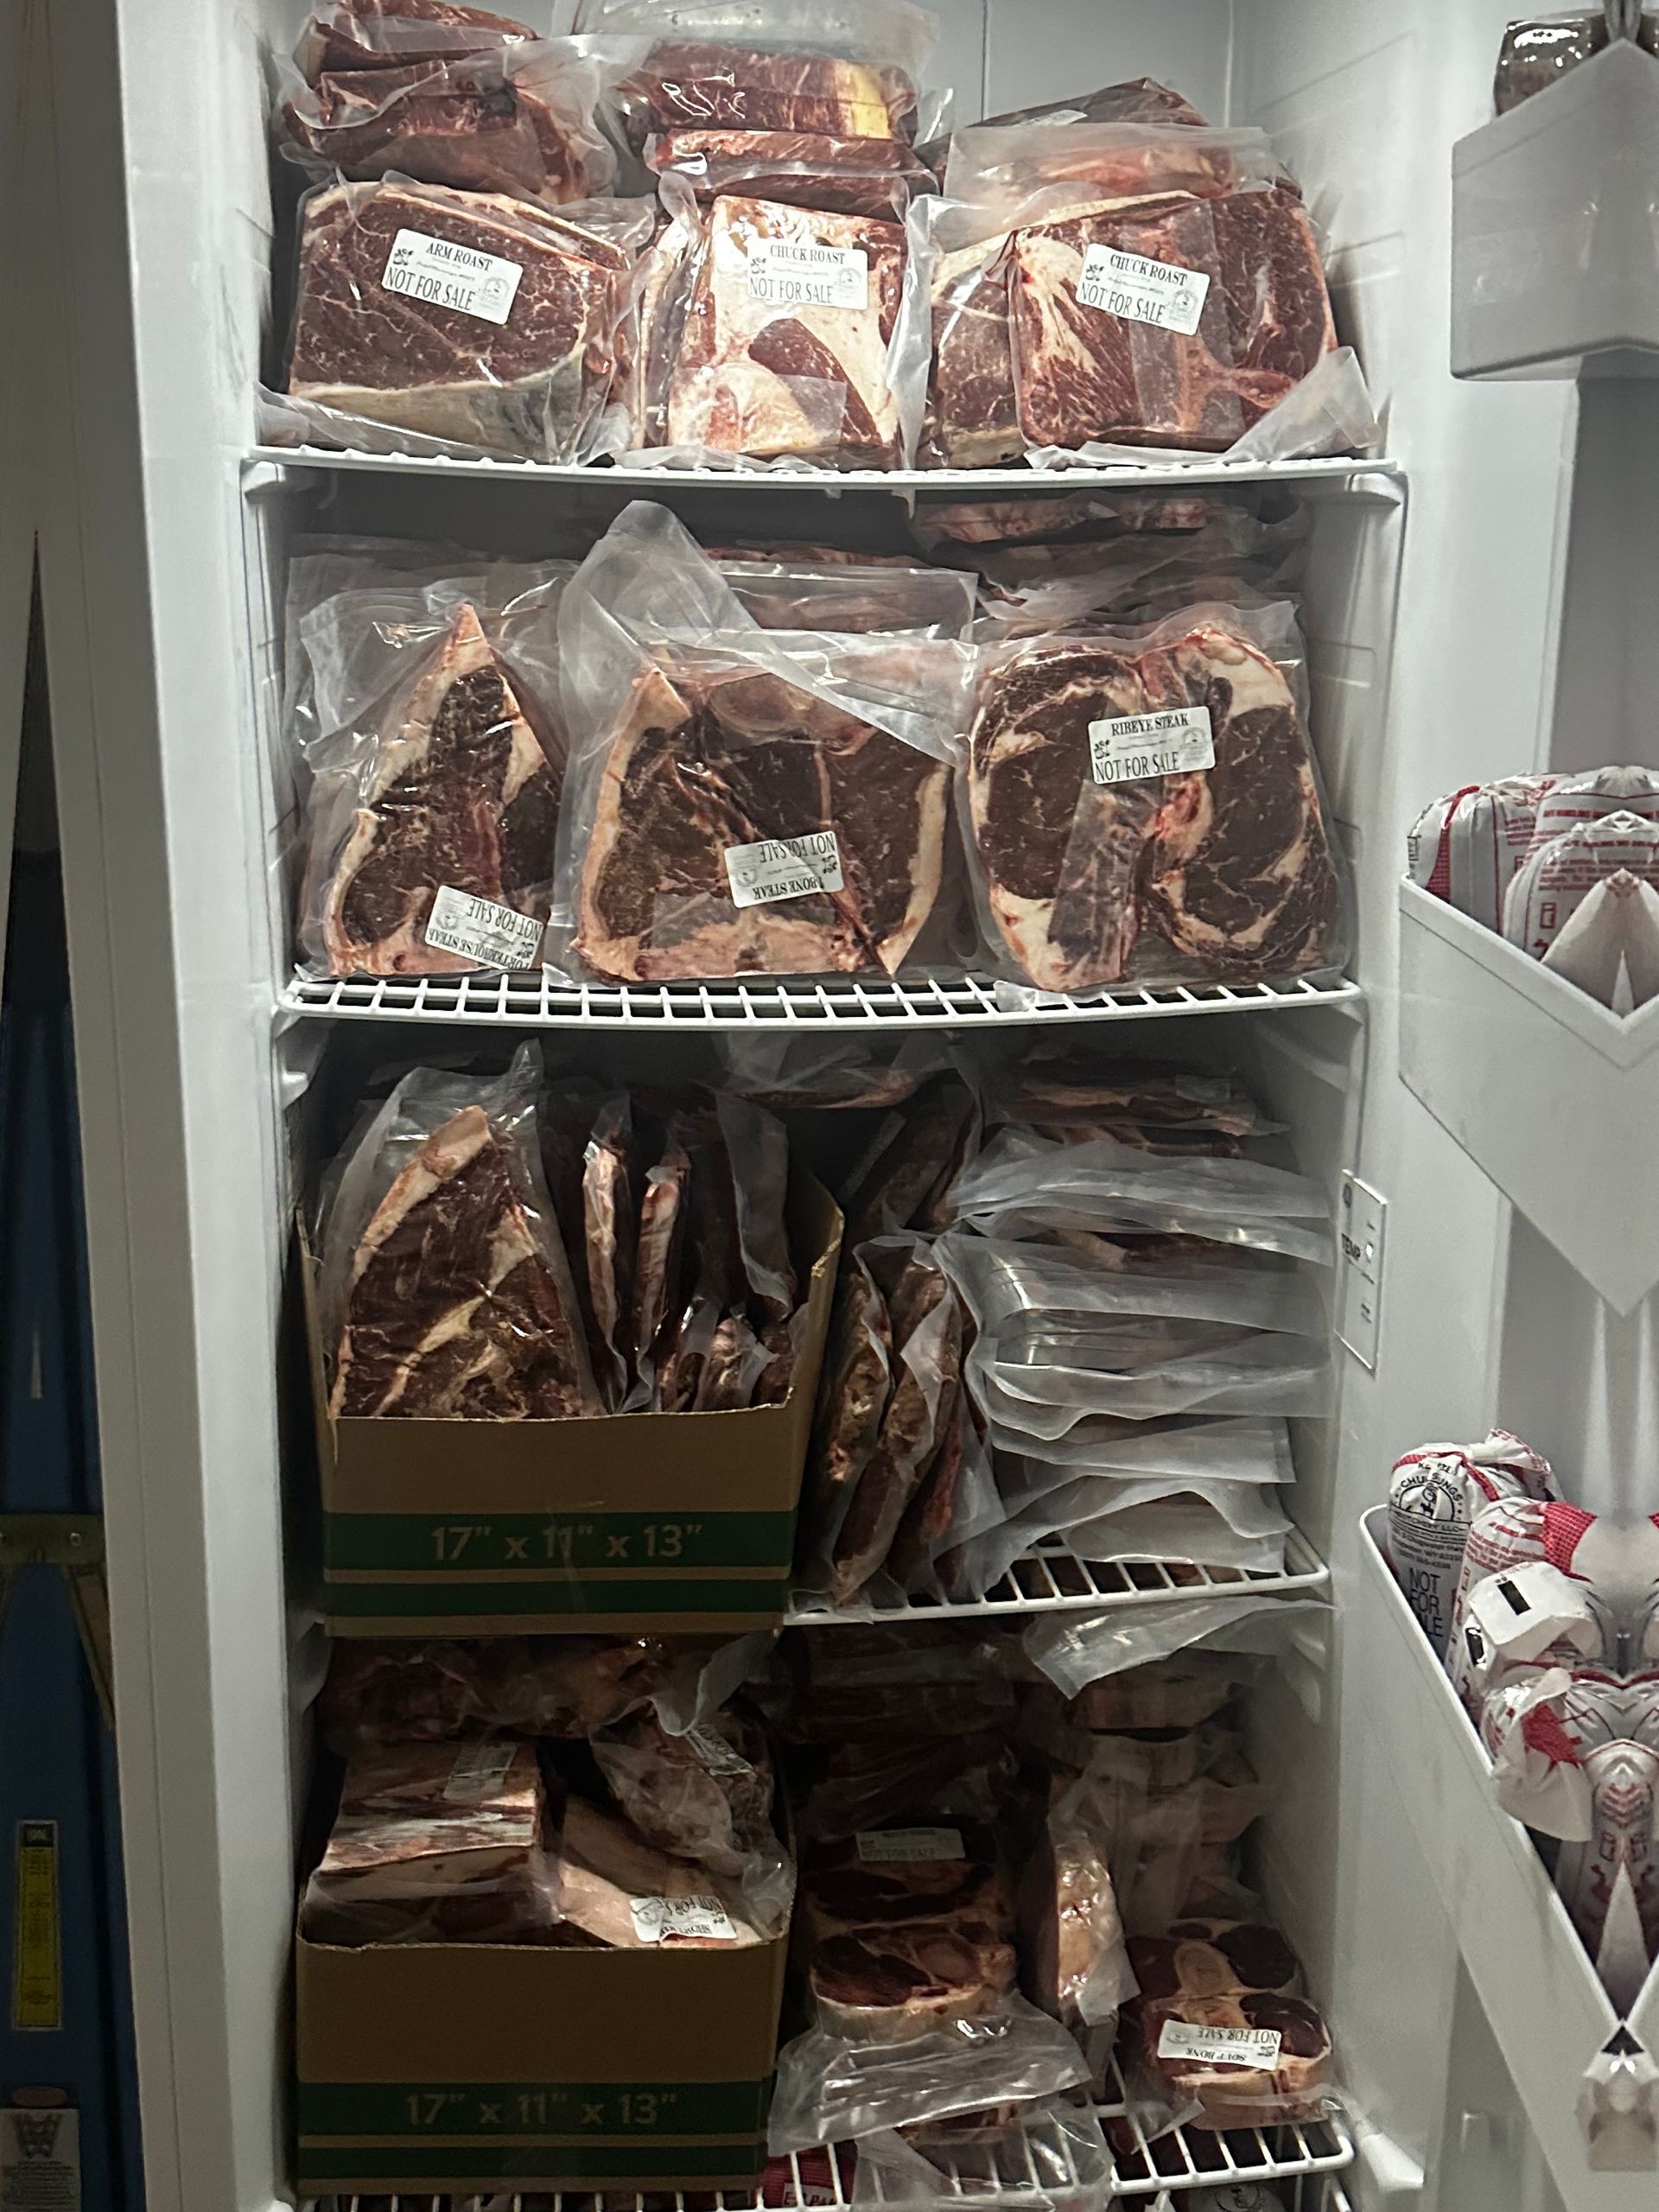 A refrigerator filled with lots of meat and boxes.